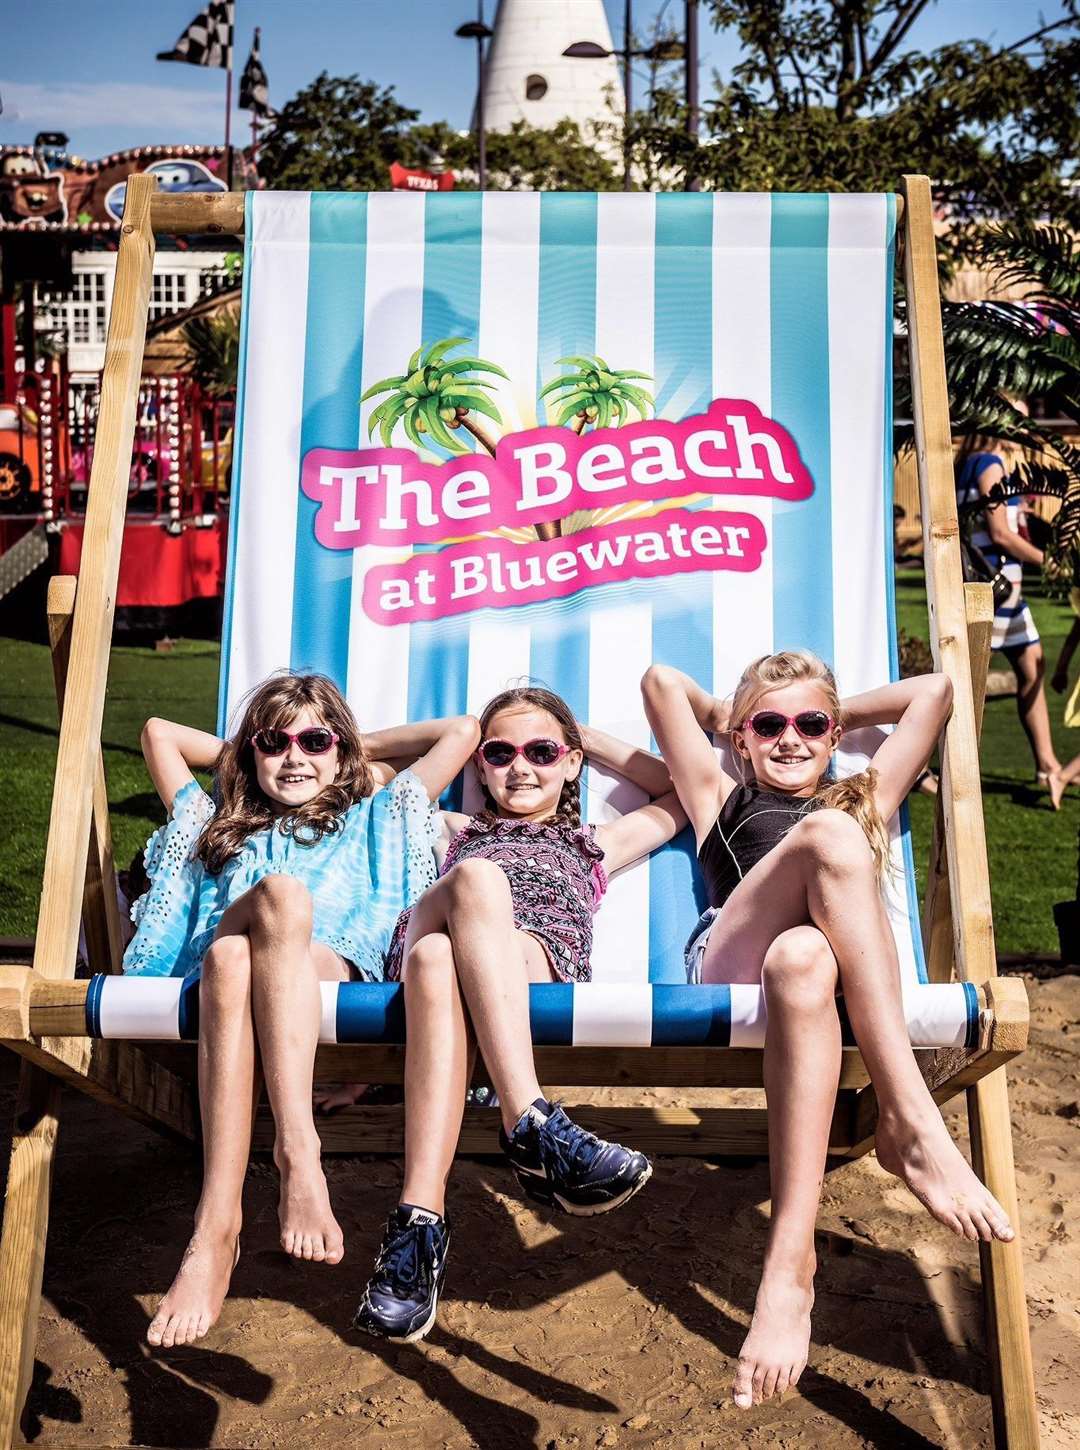 The Beach will be at Bluewater throughout the summer holidays